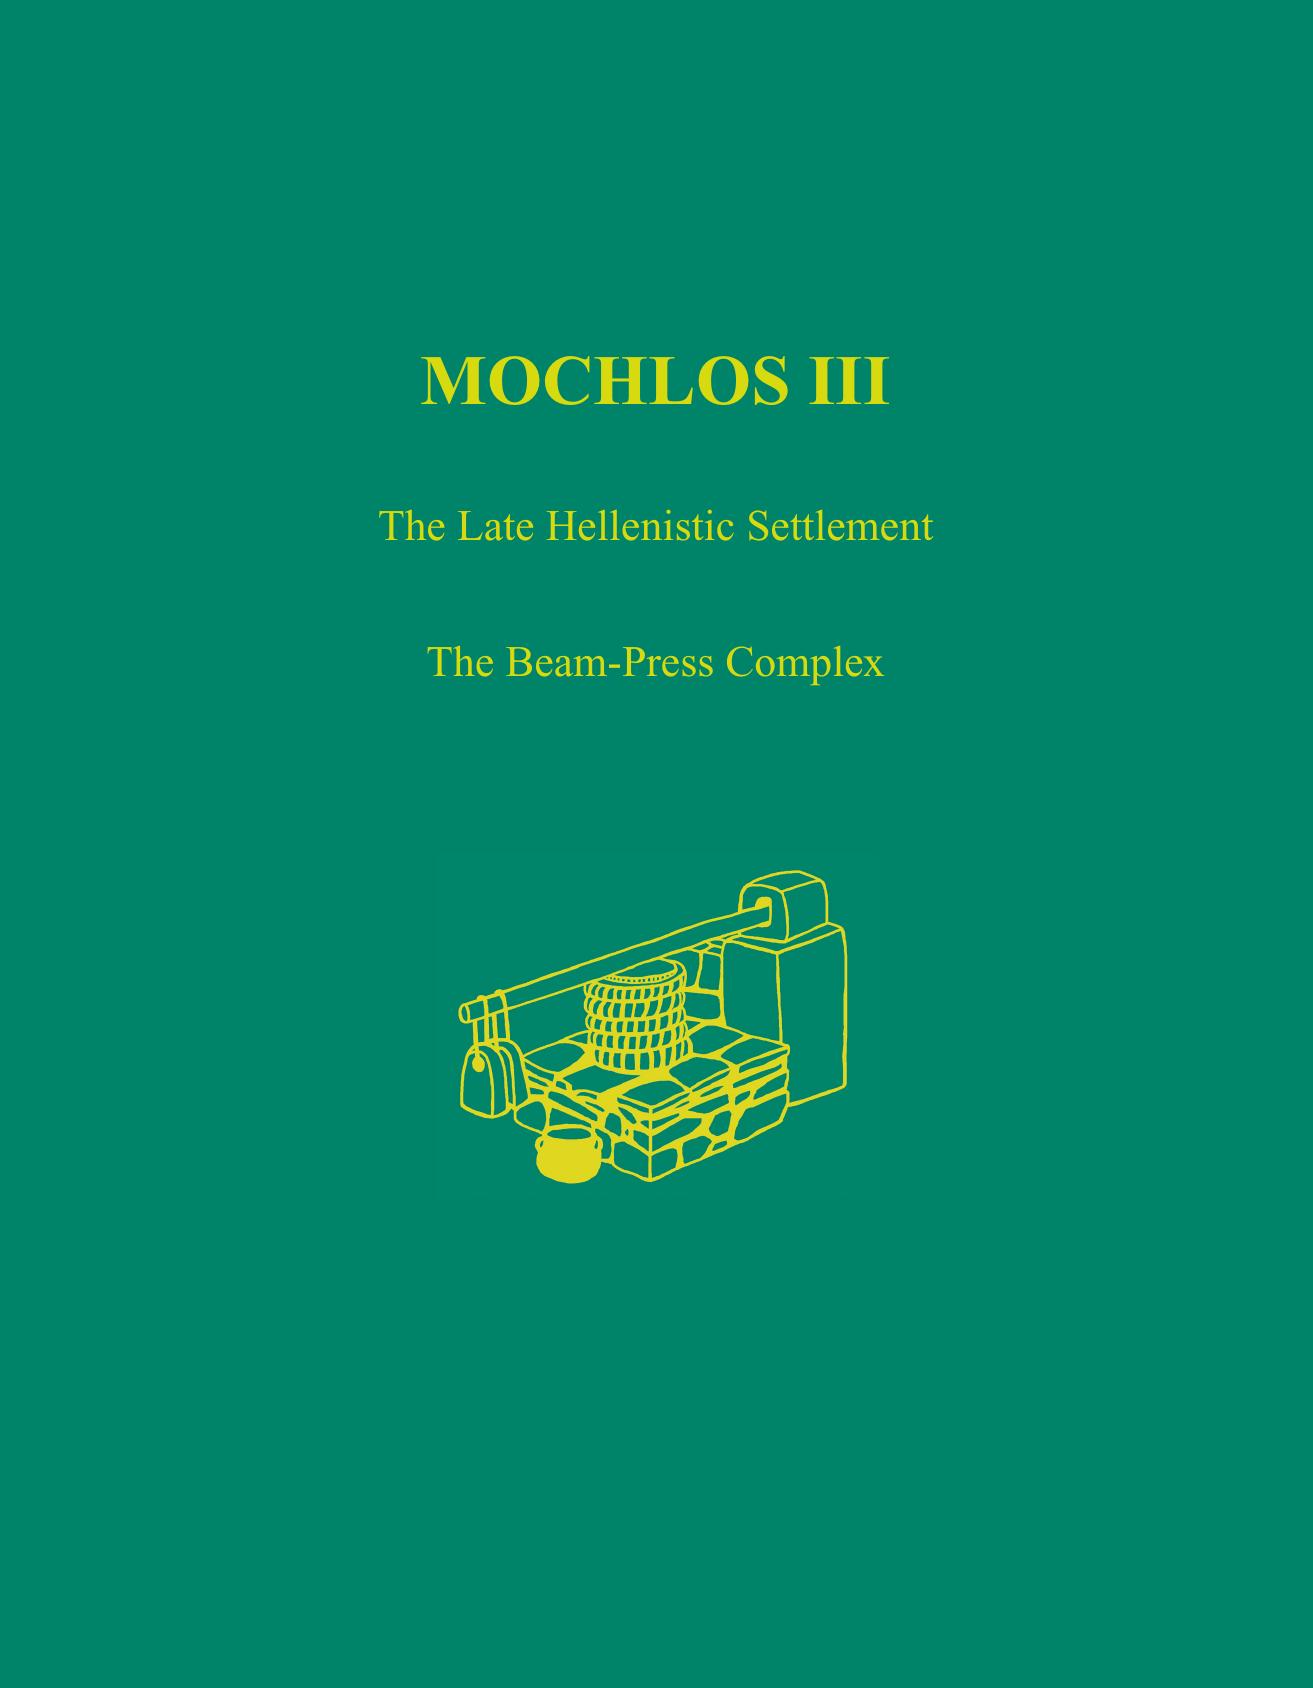 Mochlos III: The Late Hellenistic Settlement: The Beam-Press Complex (Prehistory Monographs) by Natalia Vogeikoff-Brogan